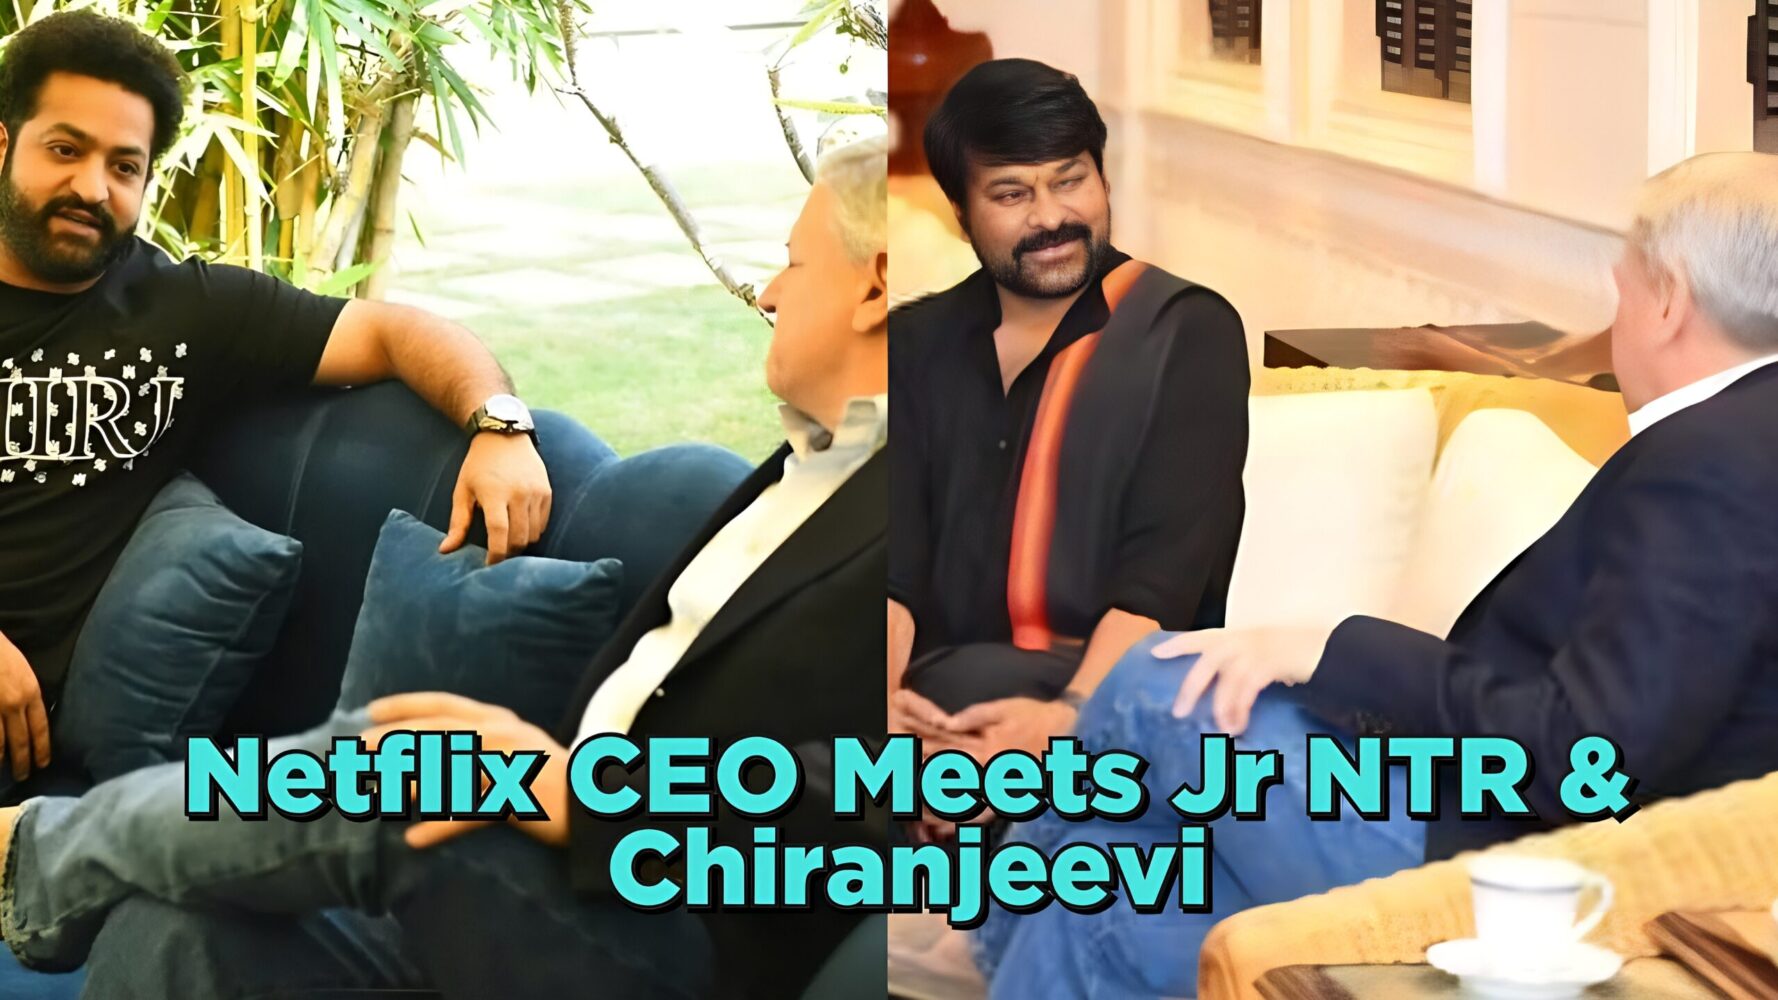 Netflix CEO Meets Jr NTR & Chiranjeevi… Young Tiger in Simple, Stylish Look: Photos